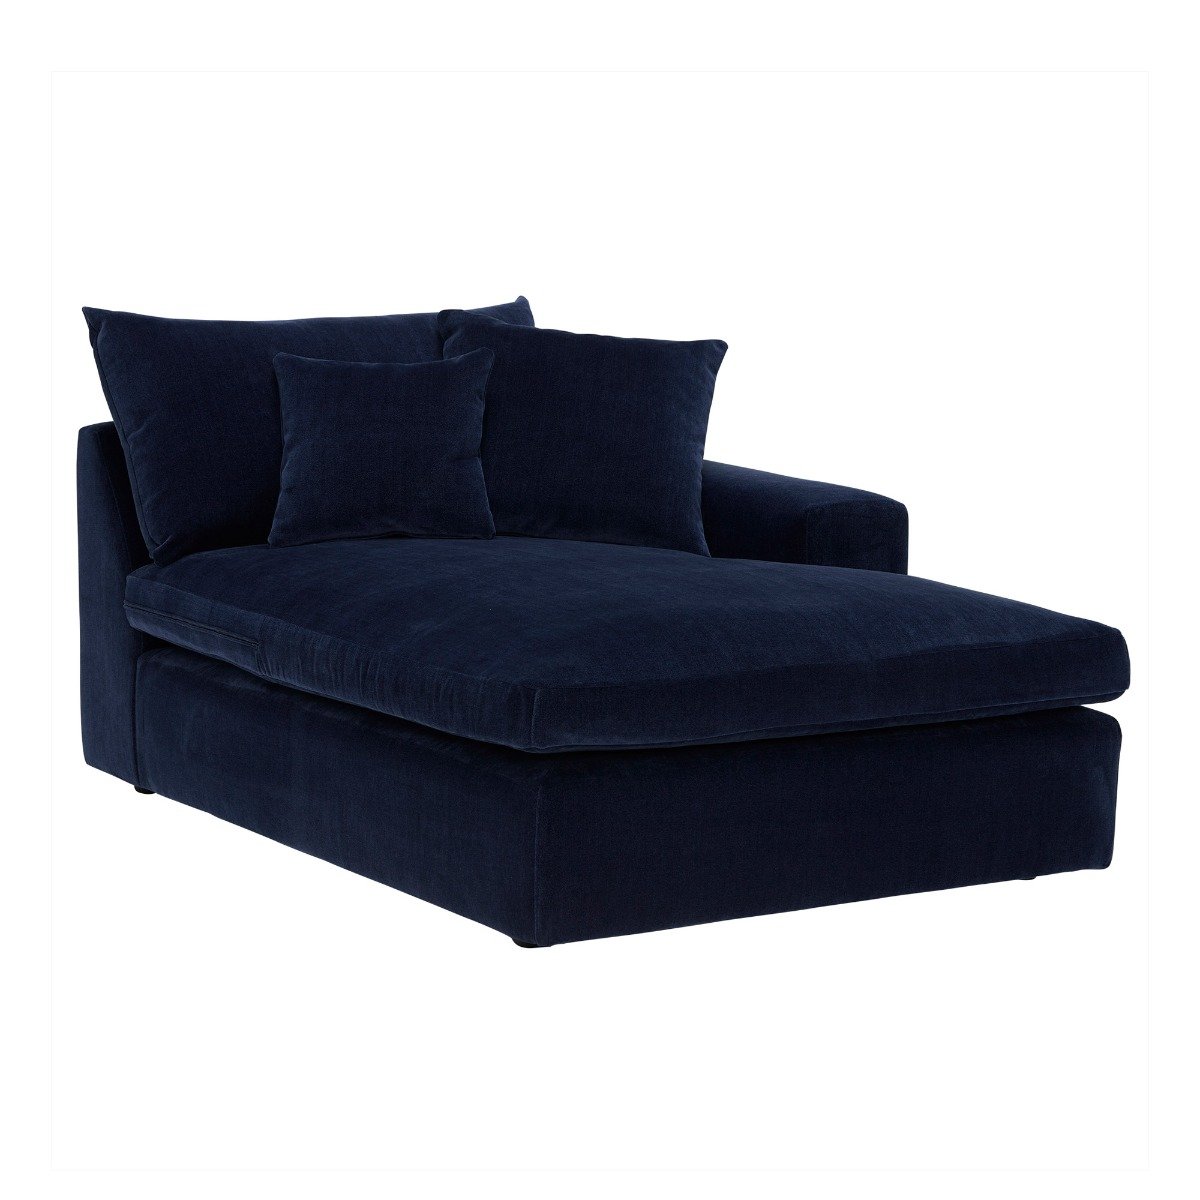 Alaska Chaise with 1 Arm Right, Blue Fabric | Barker & Stonehouse